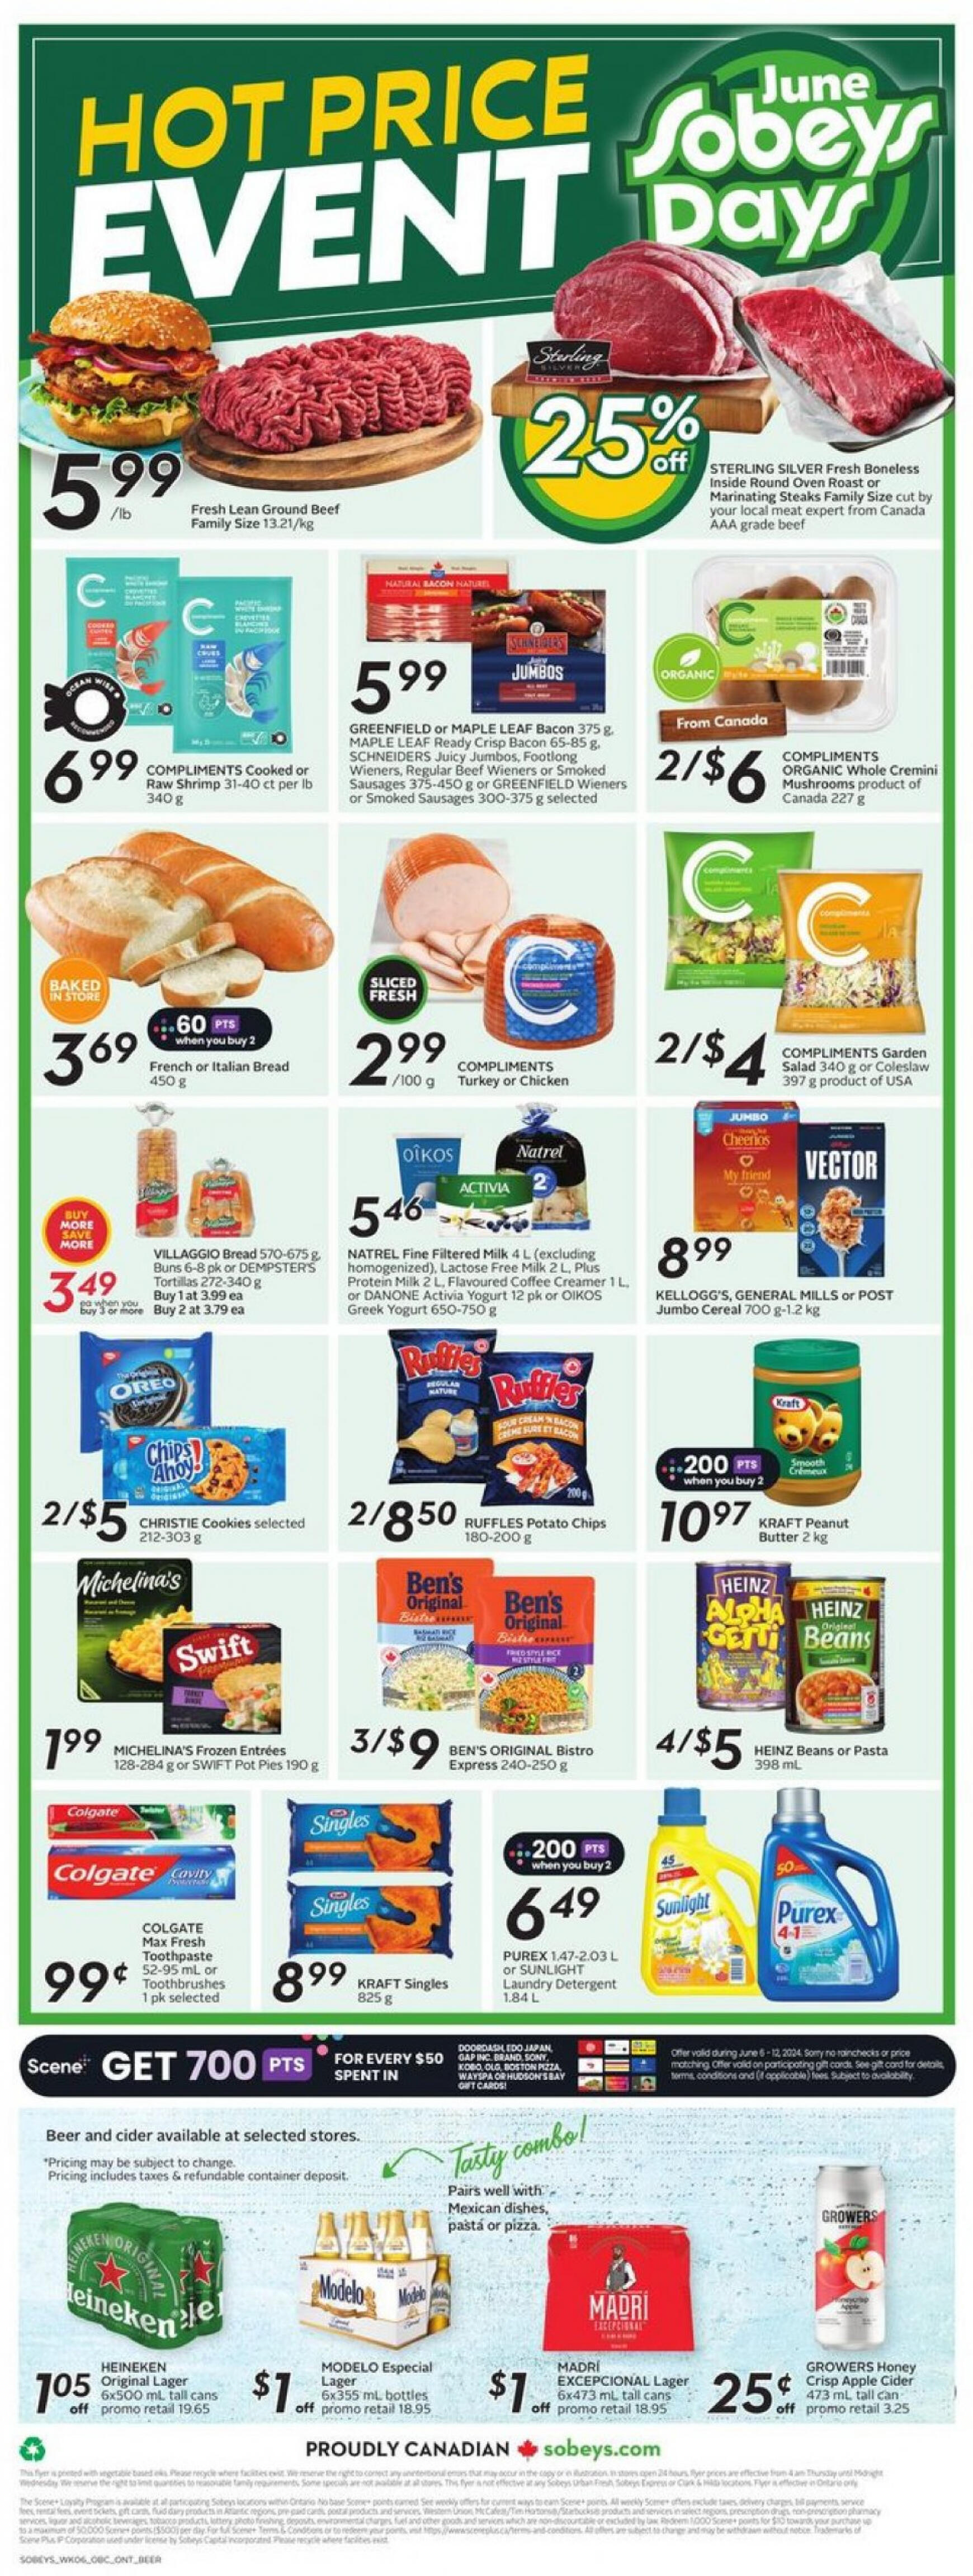 sobeys - Sobeys - Weekly Flyer - Ontario flyer current 06.06. - 12.06. - page: 4